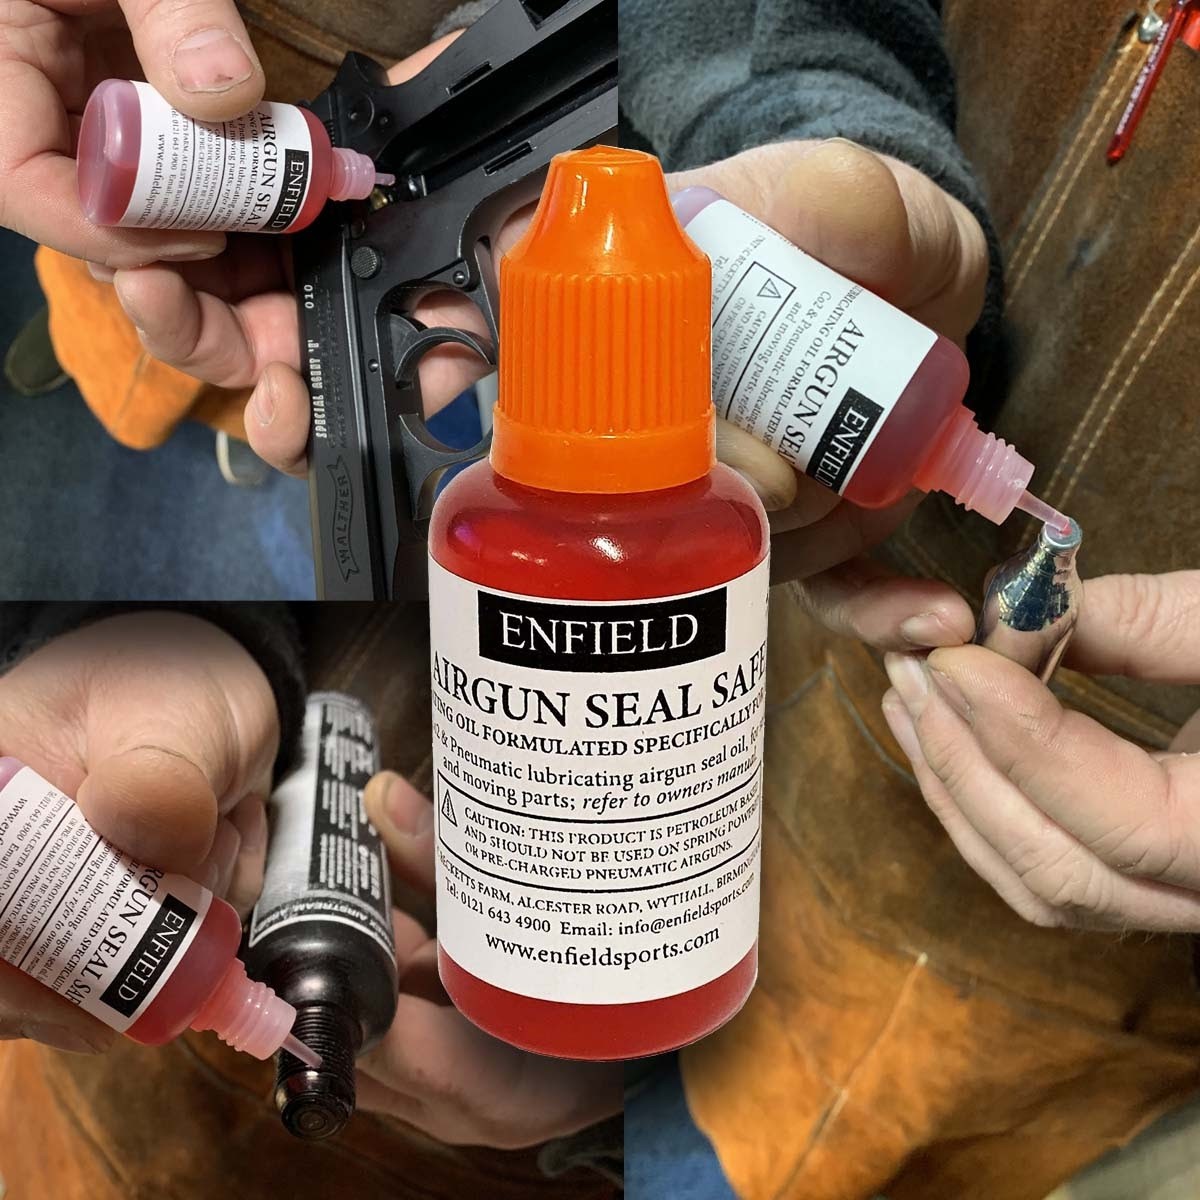 enfield_airgun_seal_safe_co2_seal_protection